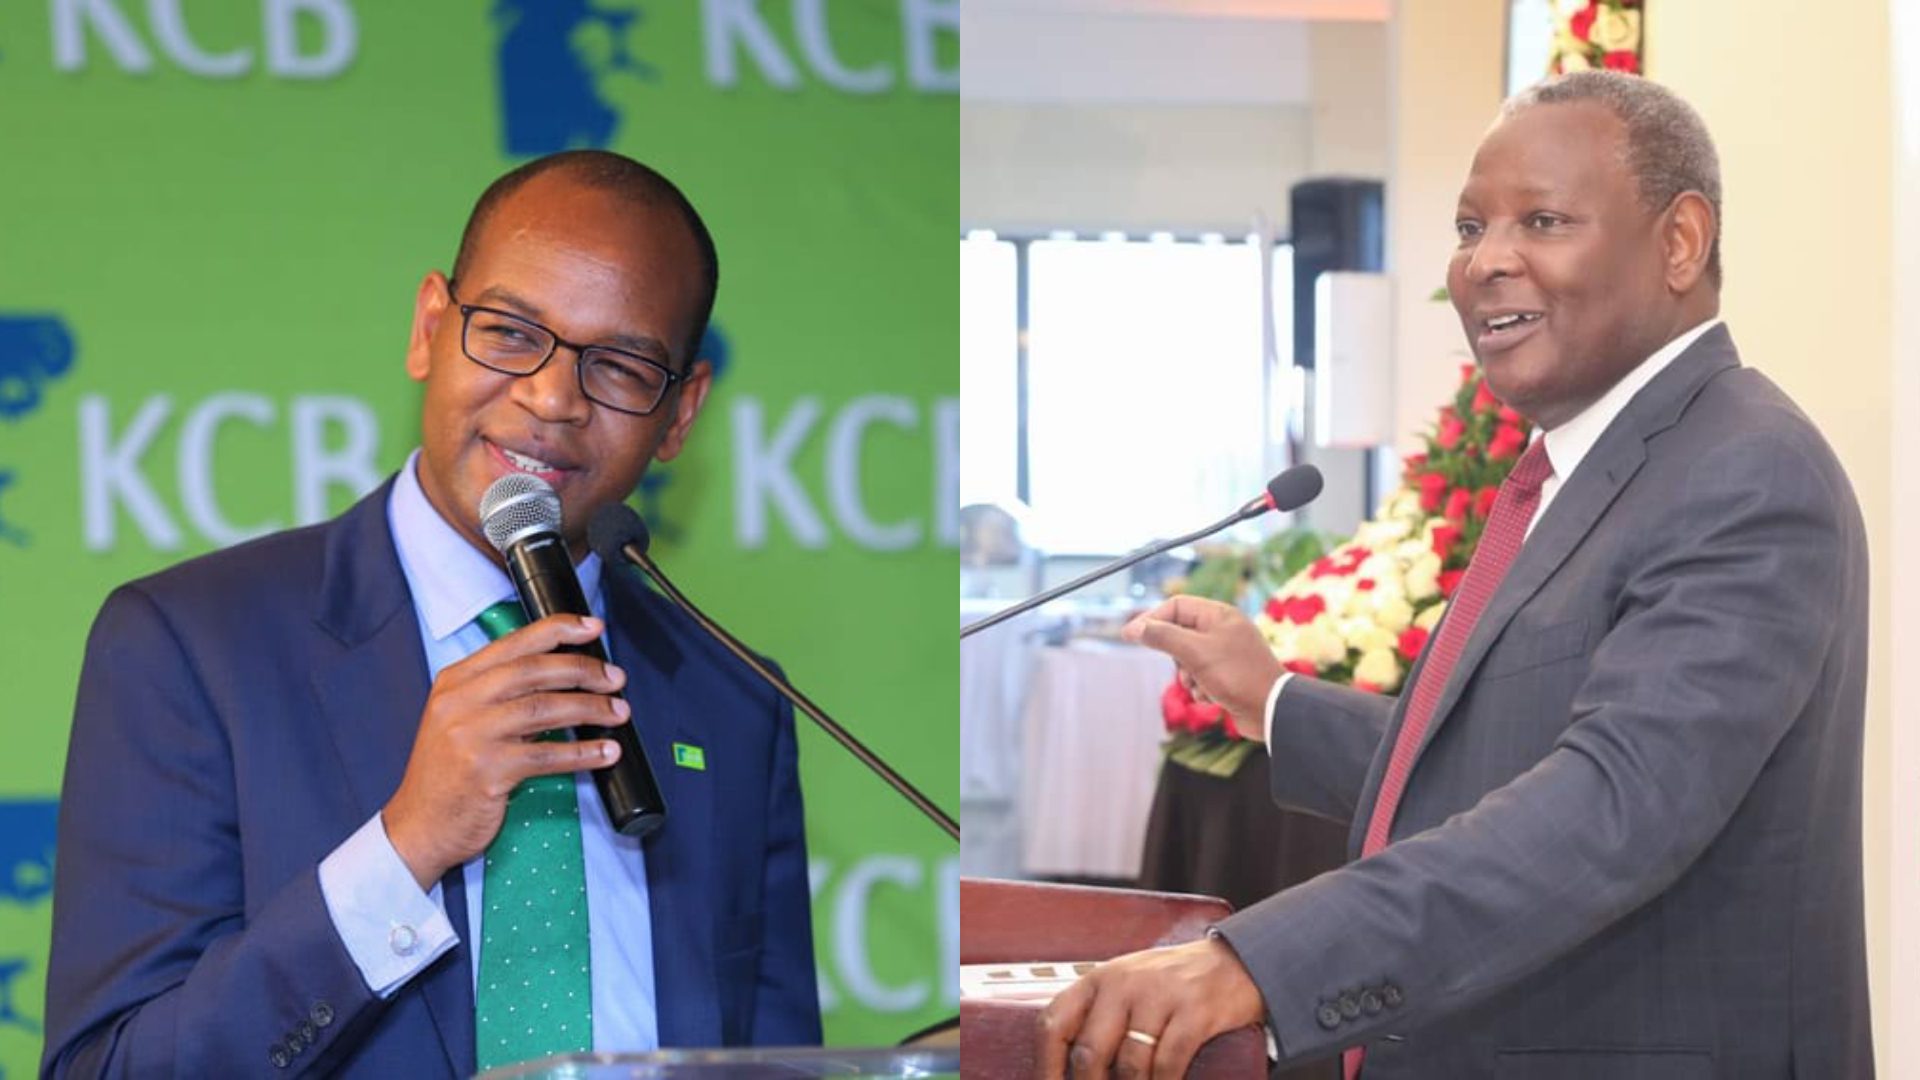 KCB joins Equity in Ksh.1 trillion valuation club